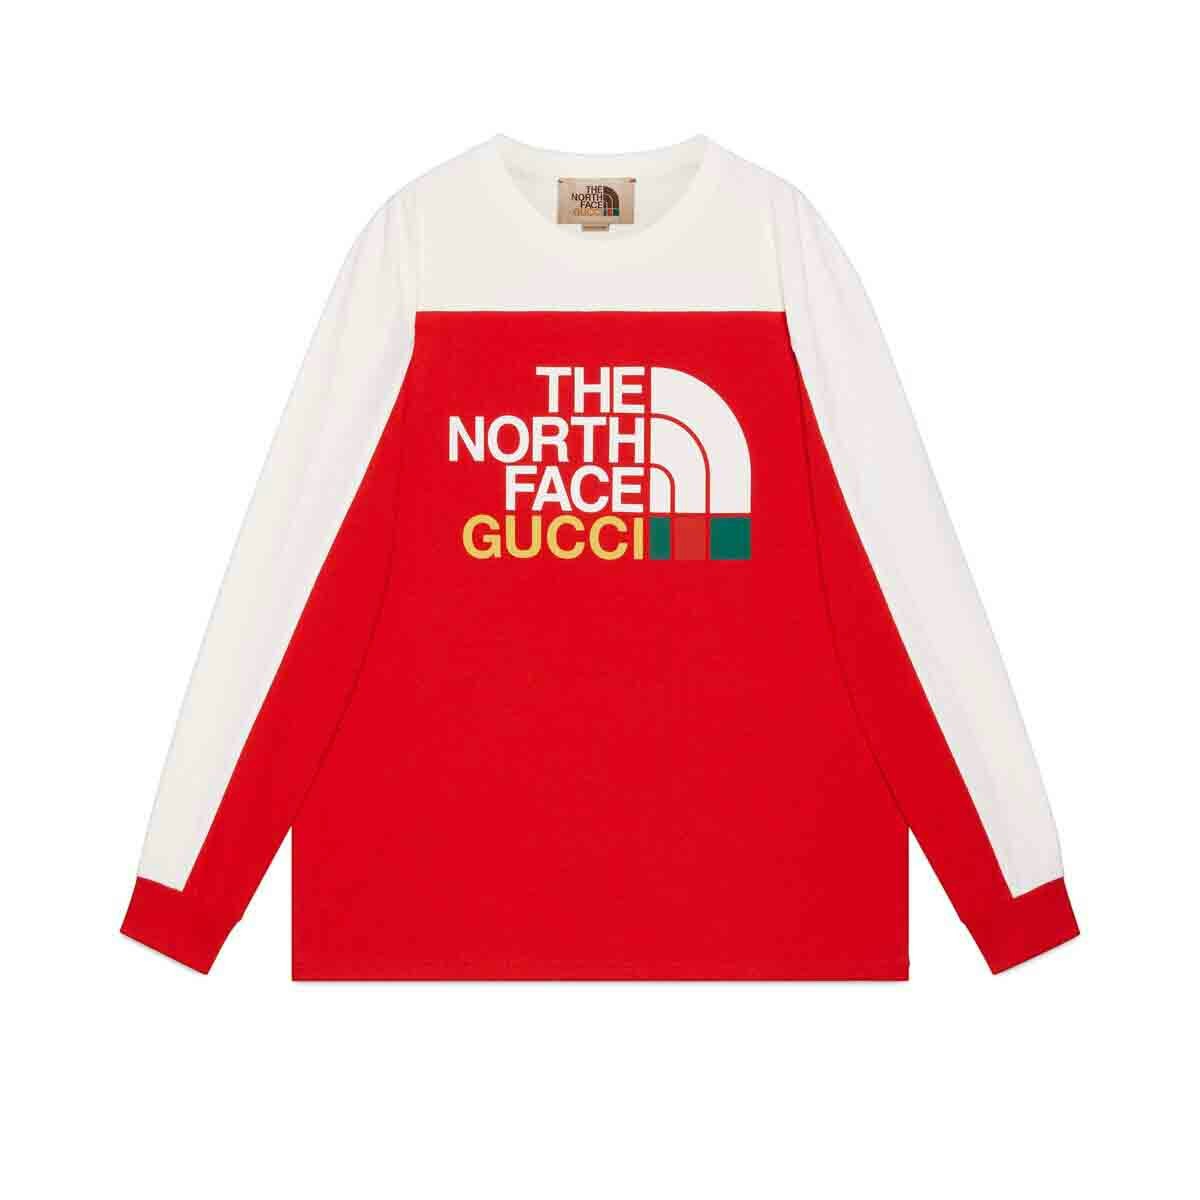 Gucci x The North Face T-shirt Red/White - FW21